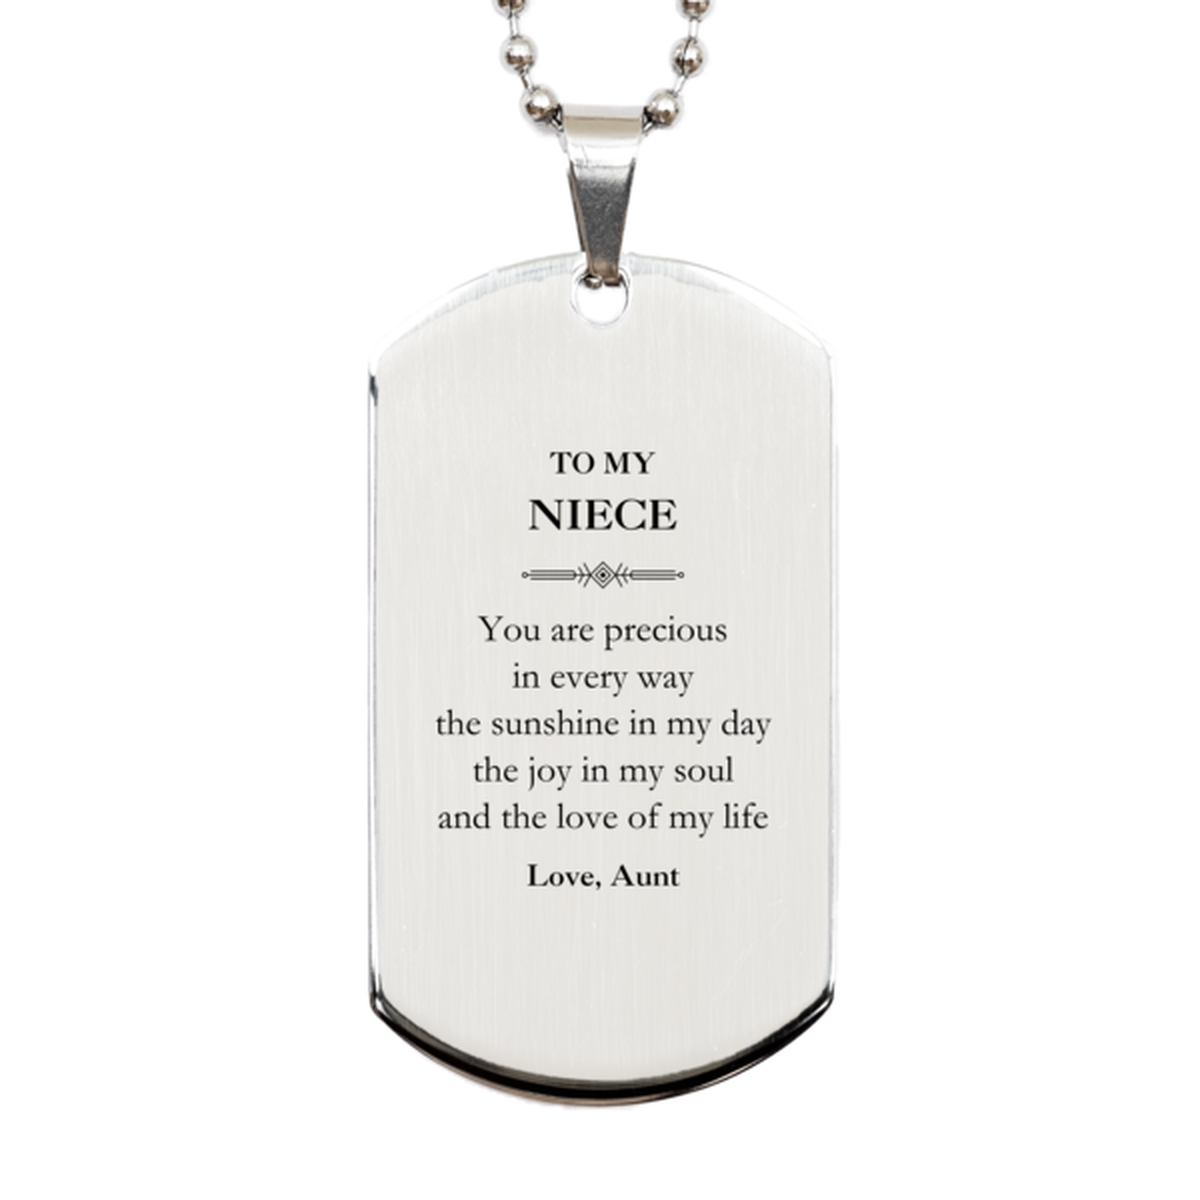 Graduation Gifts for Niece Silver Dog Tag Present from Aunt, Christmas Niece Birthday Gifts Niece You are precious in every way the sunshine in my day. Love, Aunt